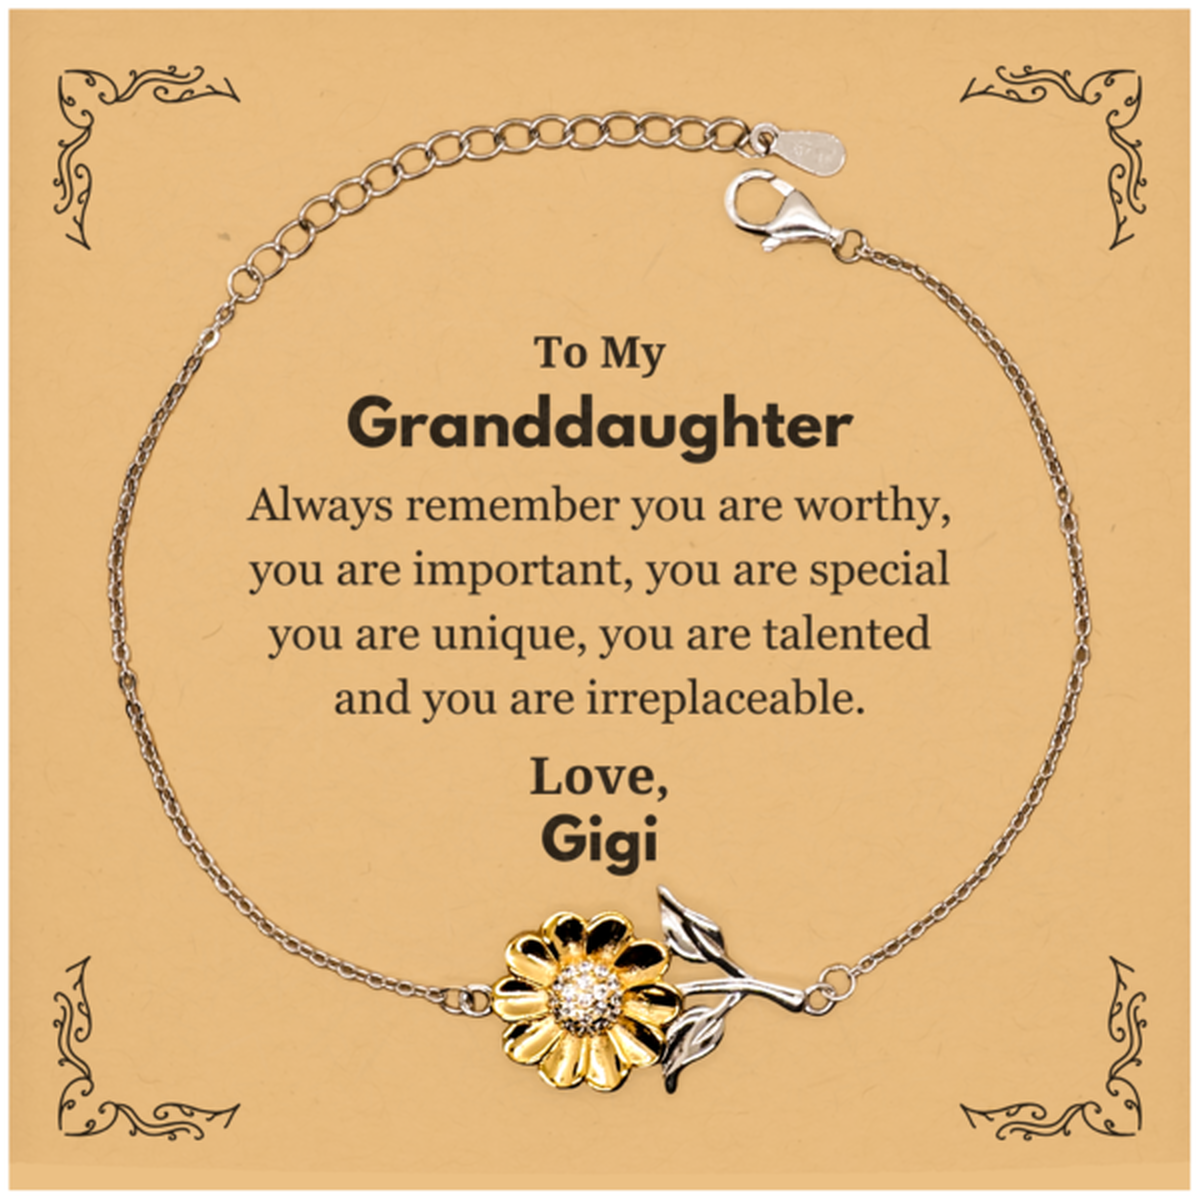 Granddaughter Birthday Gifts from Gigi, Inspirational Sunflower Bracelet for Granddaughter Christmas Graduation Gifts for Granddaughter Always remember you are worthy, you are important. Love, Gigi